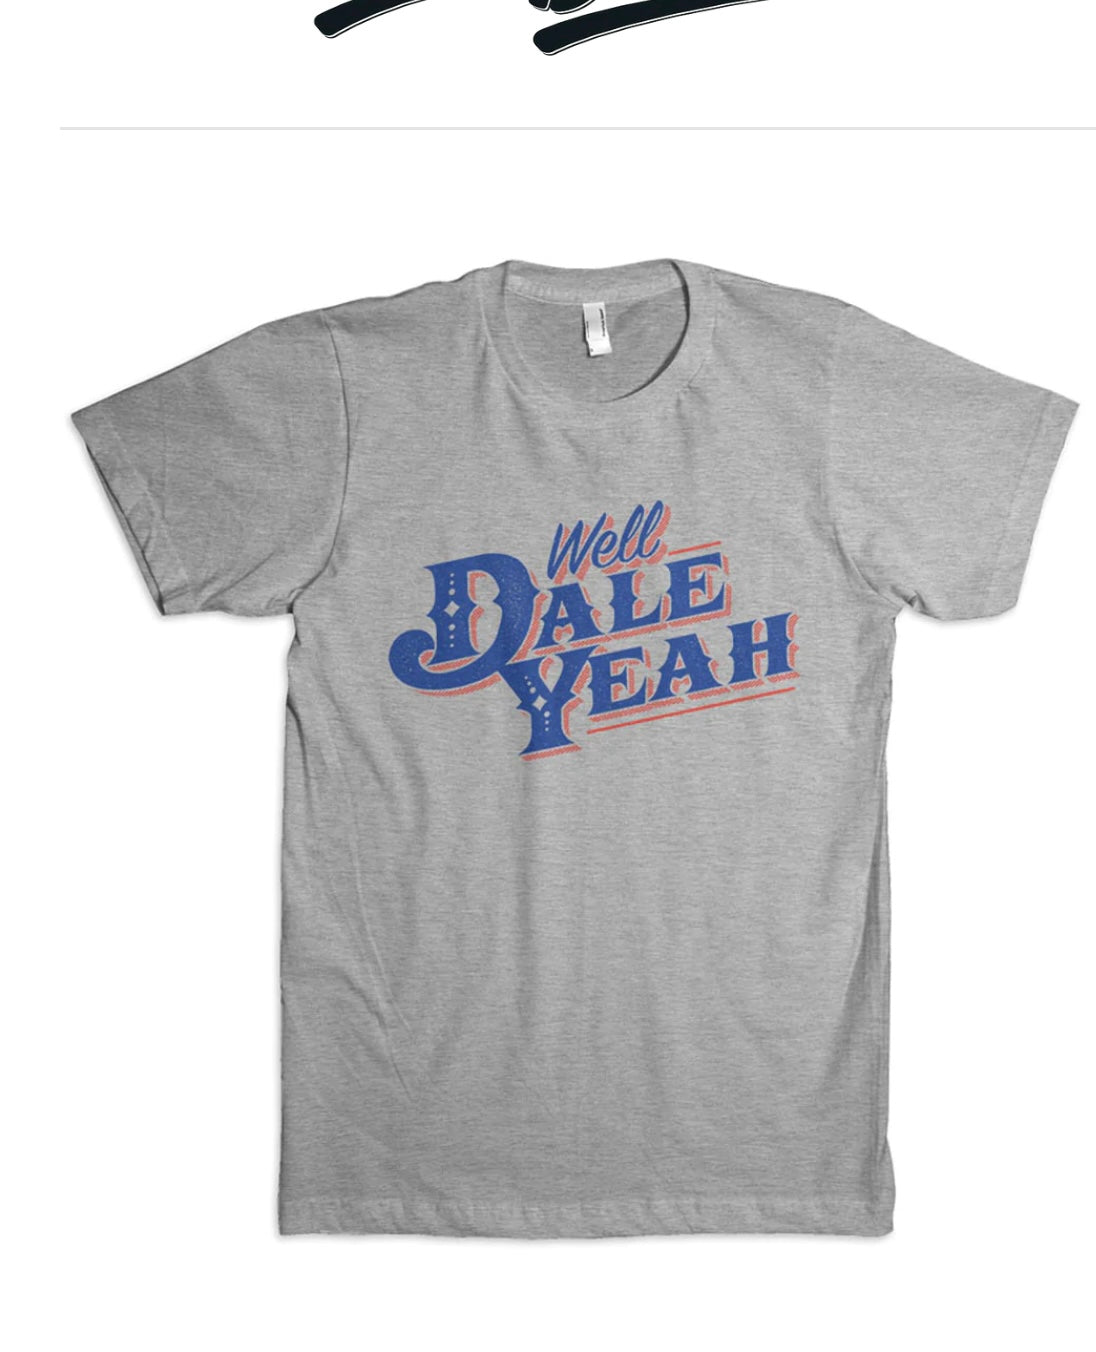 Well Dale Yeah t-shirt 30% off! - Dale Brisby